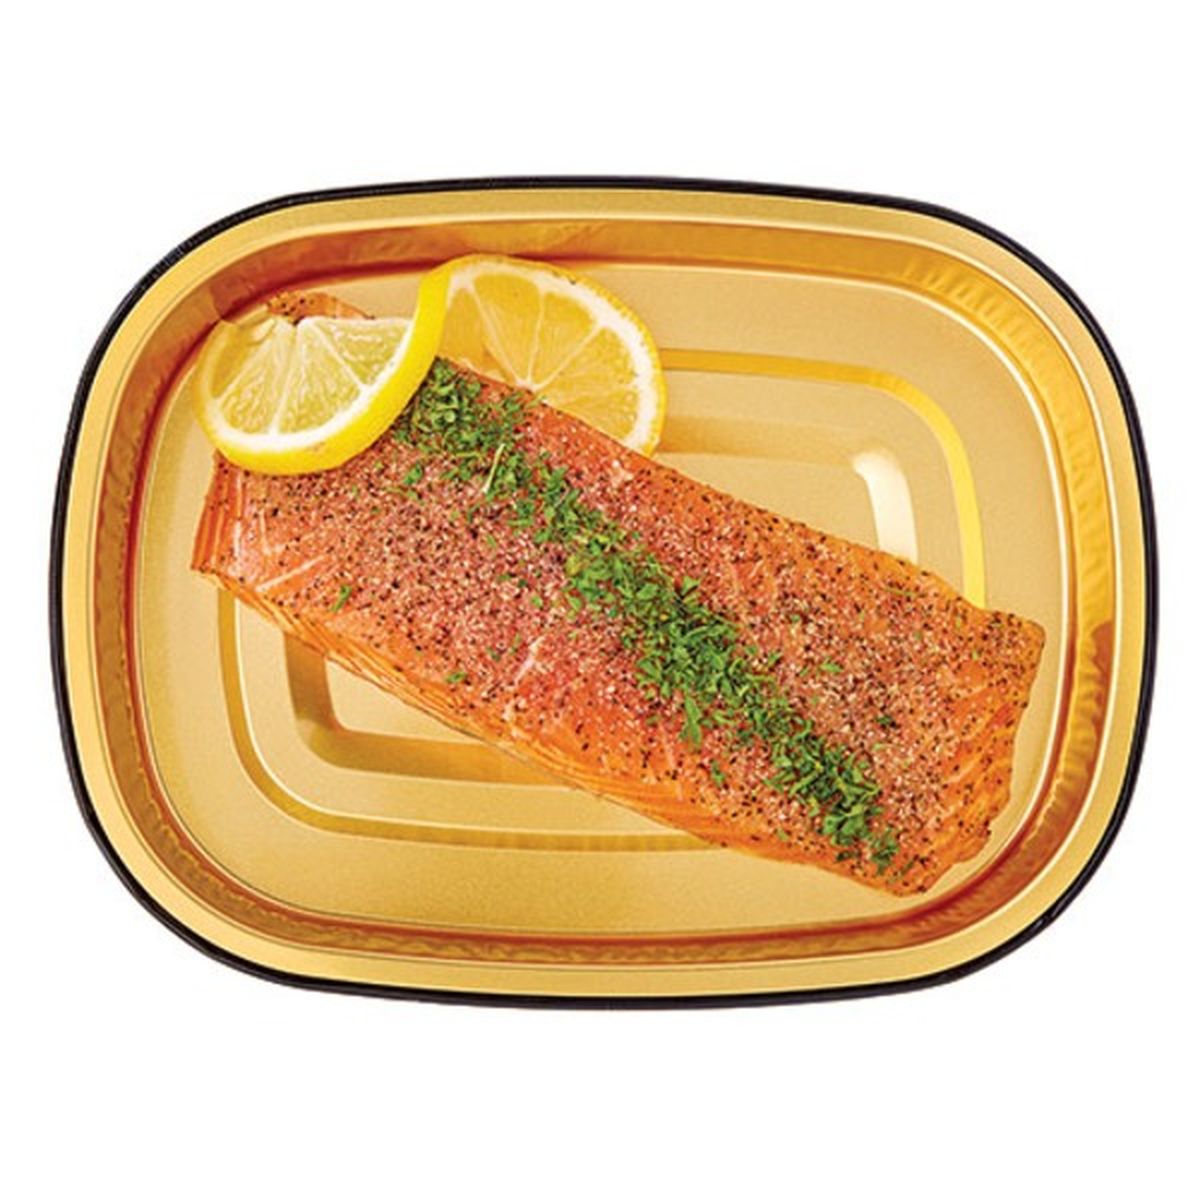 Calories in Wegmans Ready to Cook Salmon with Lemon Pepper Rub